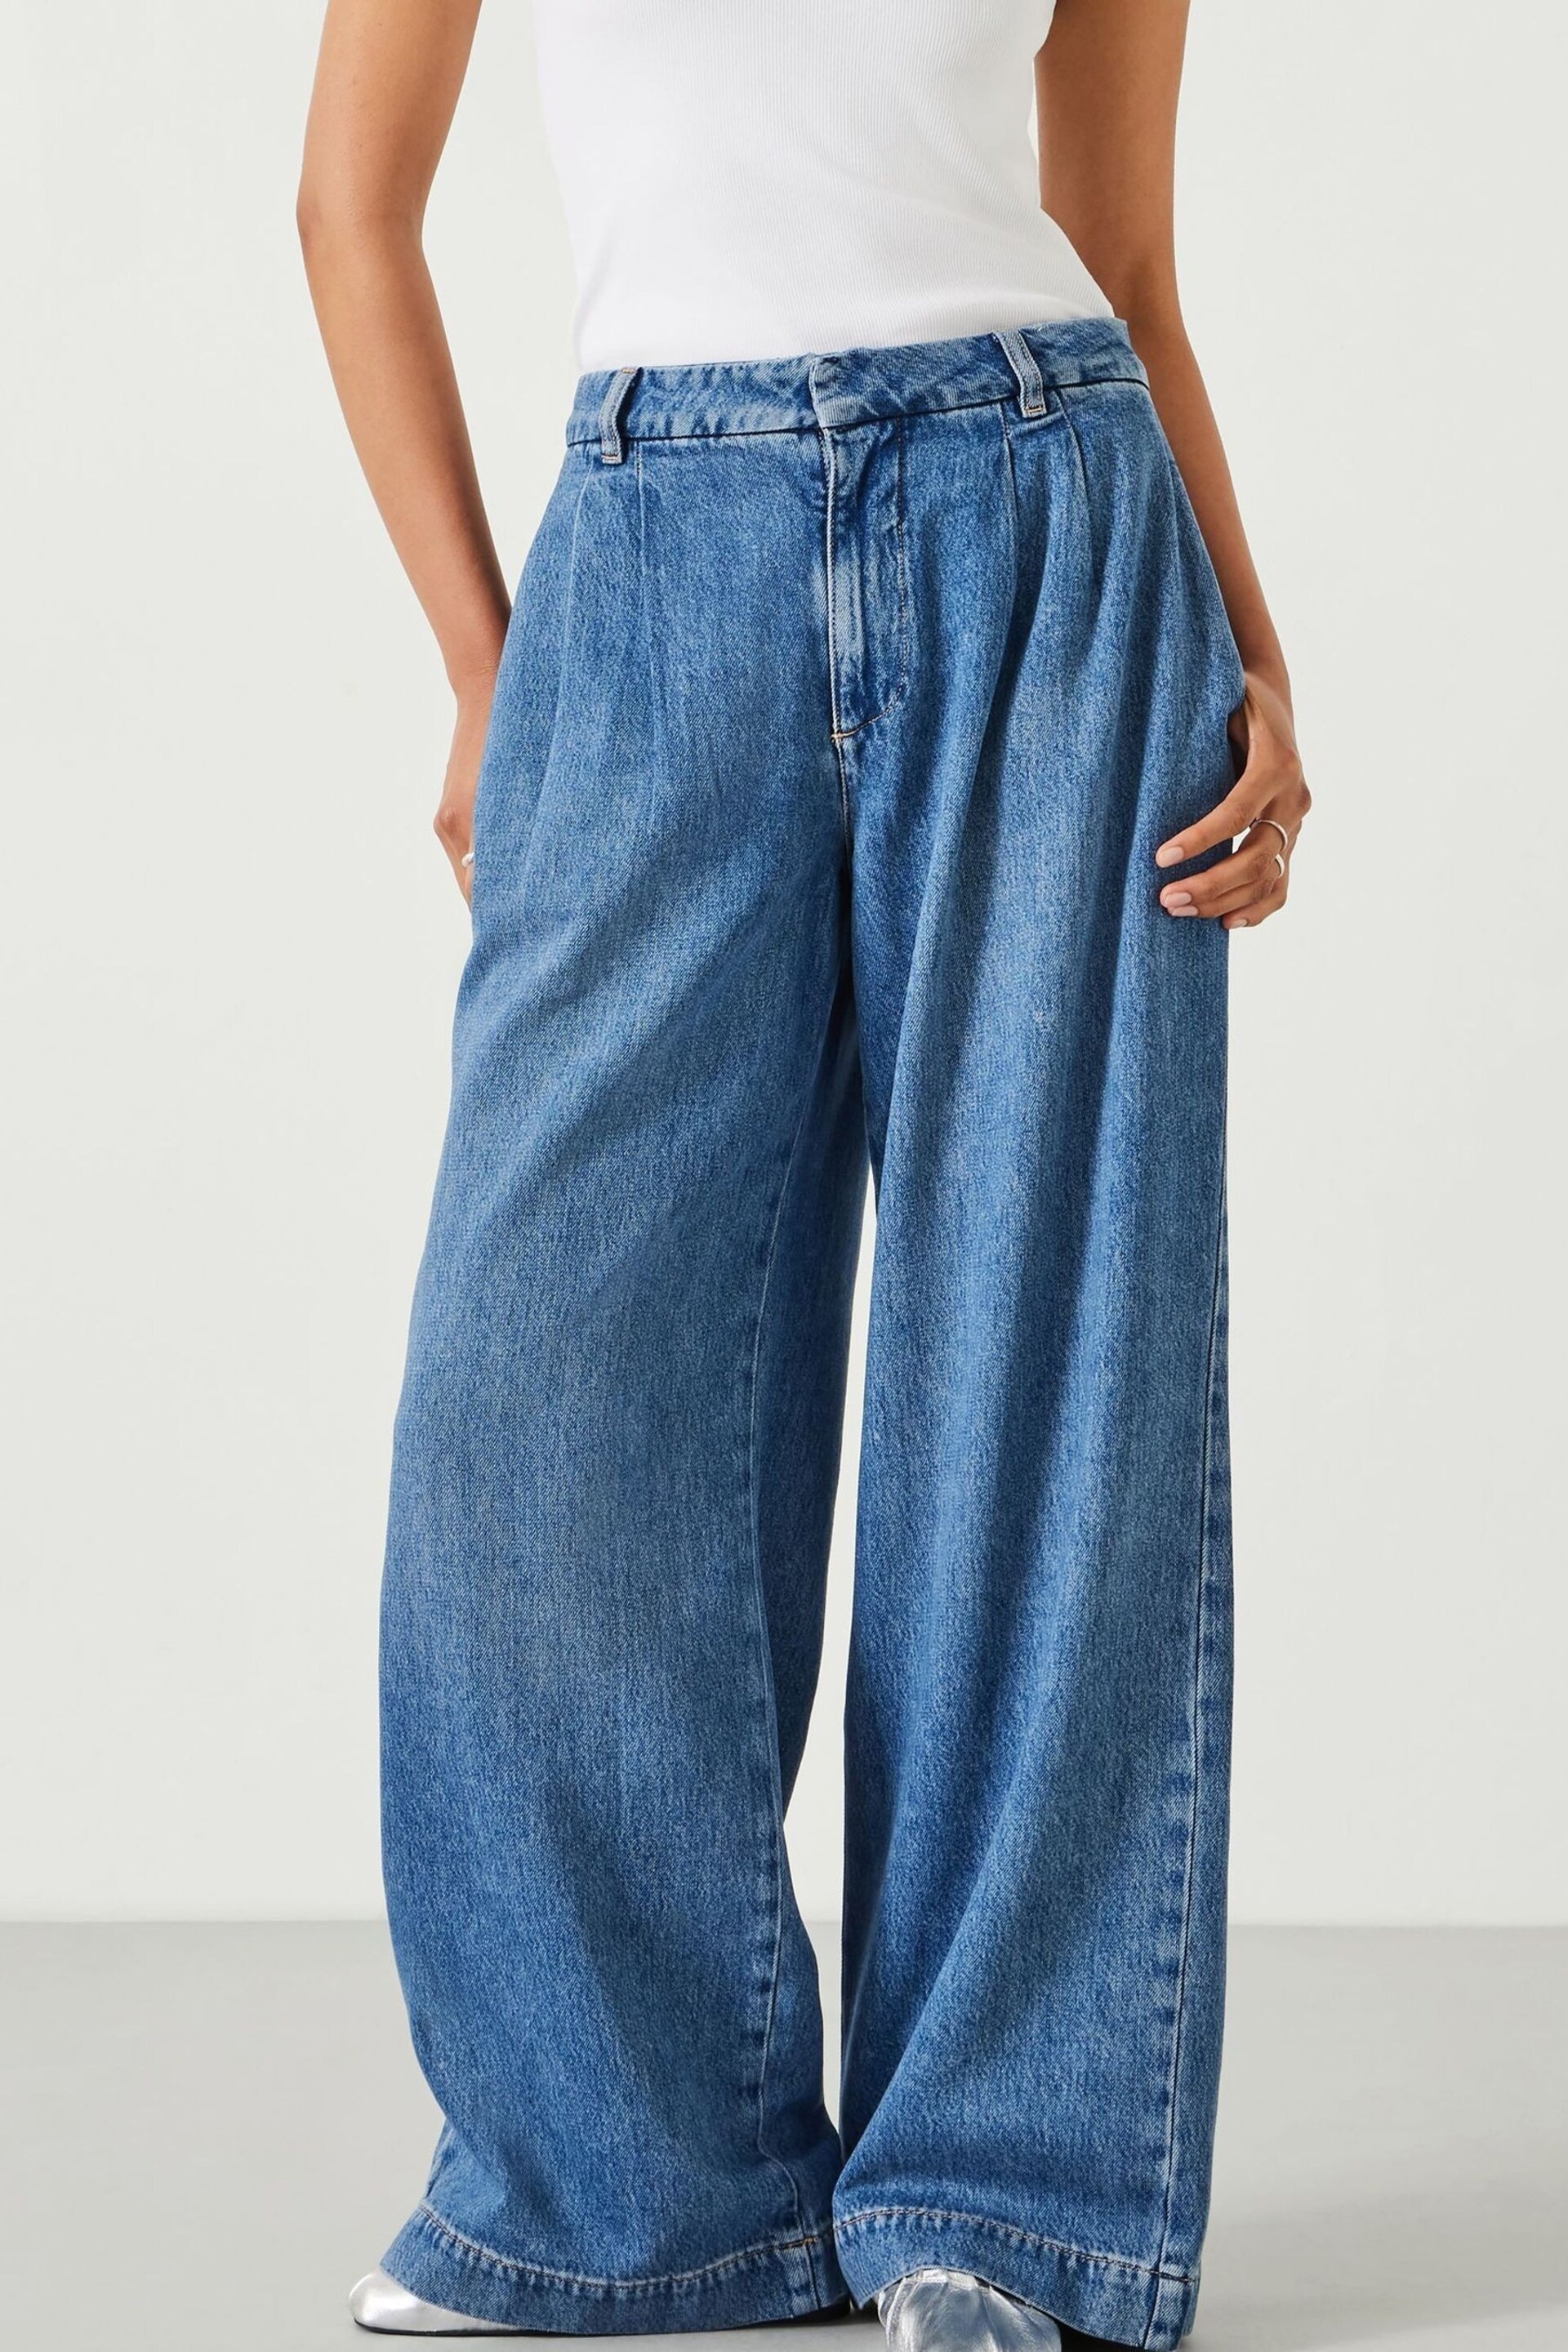 Hush Blue Lya Pleated Wide-Leg Jeans - Image 1 of 5